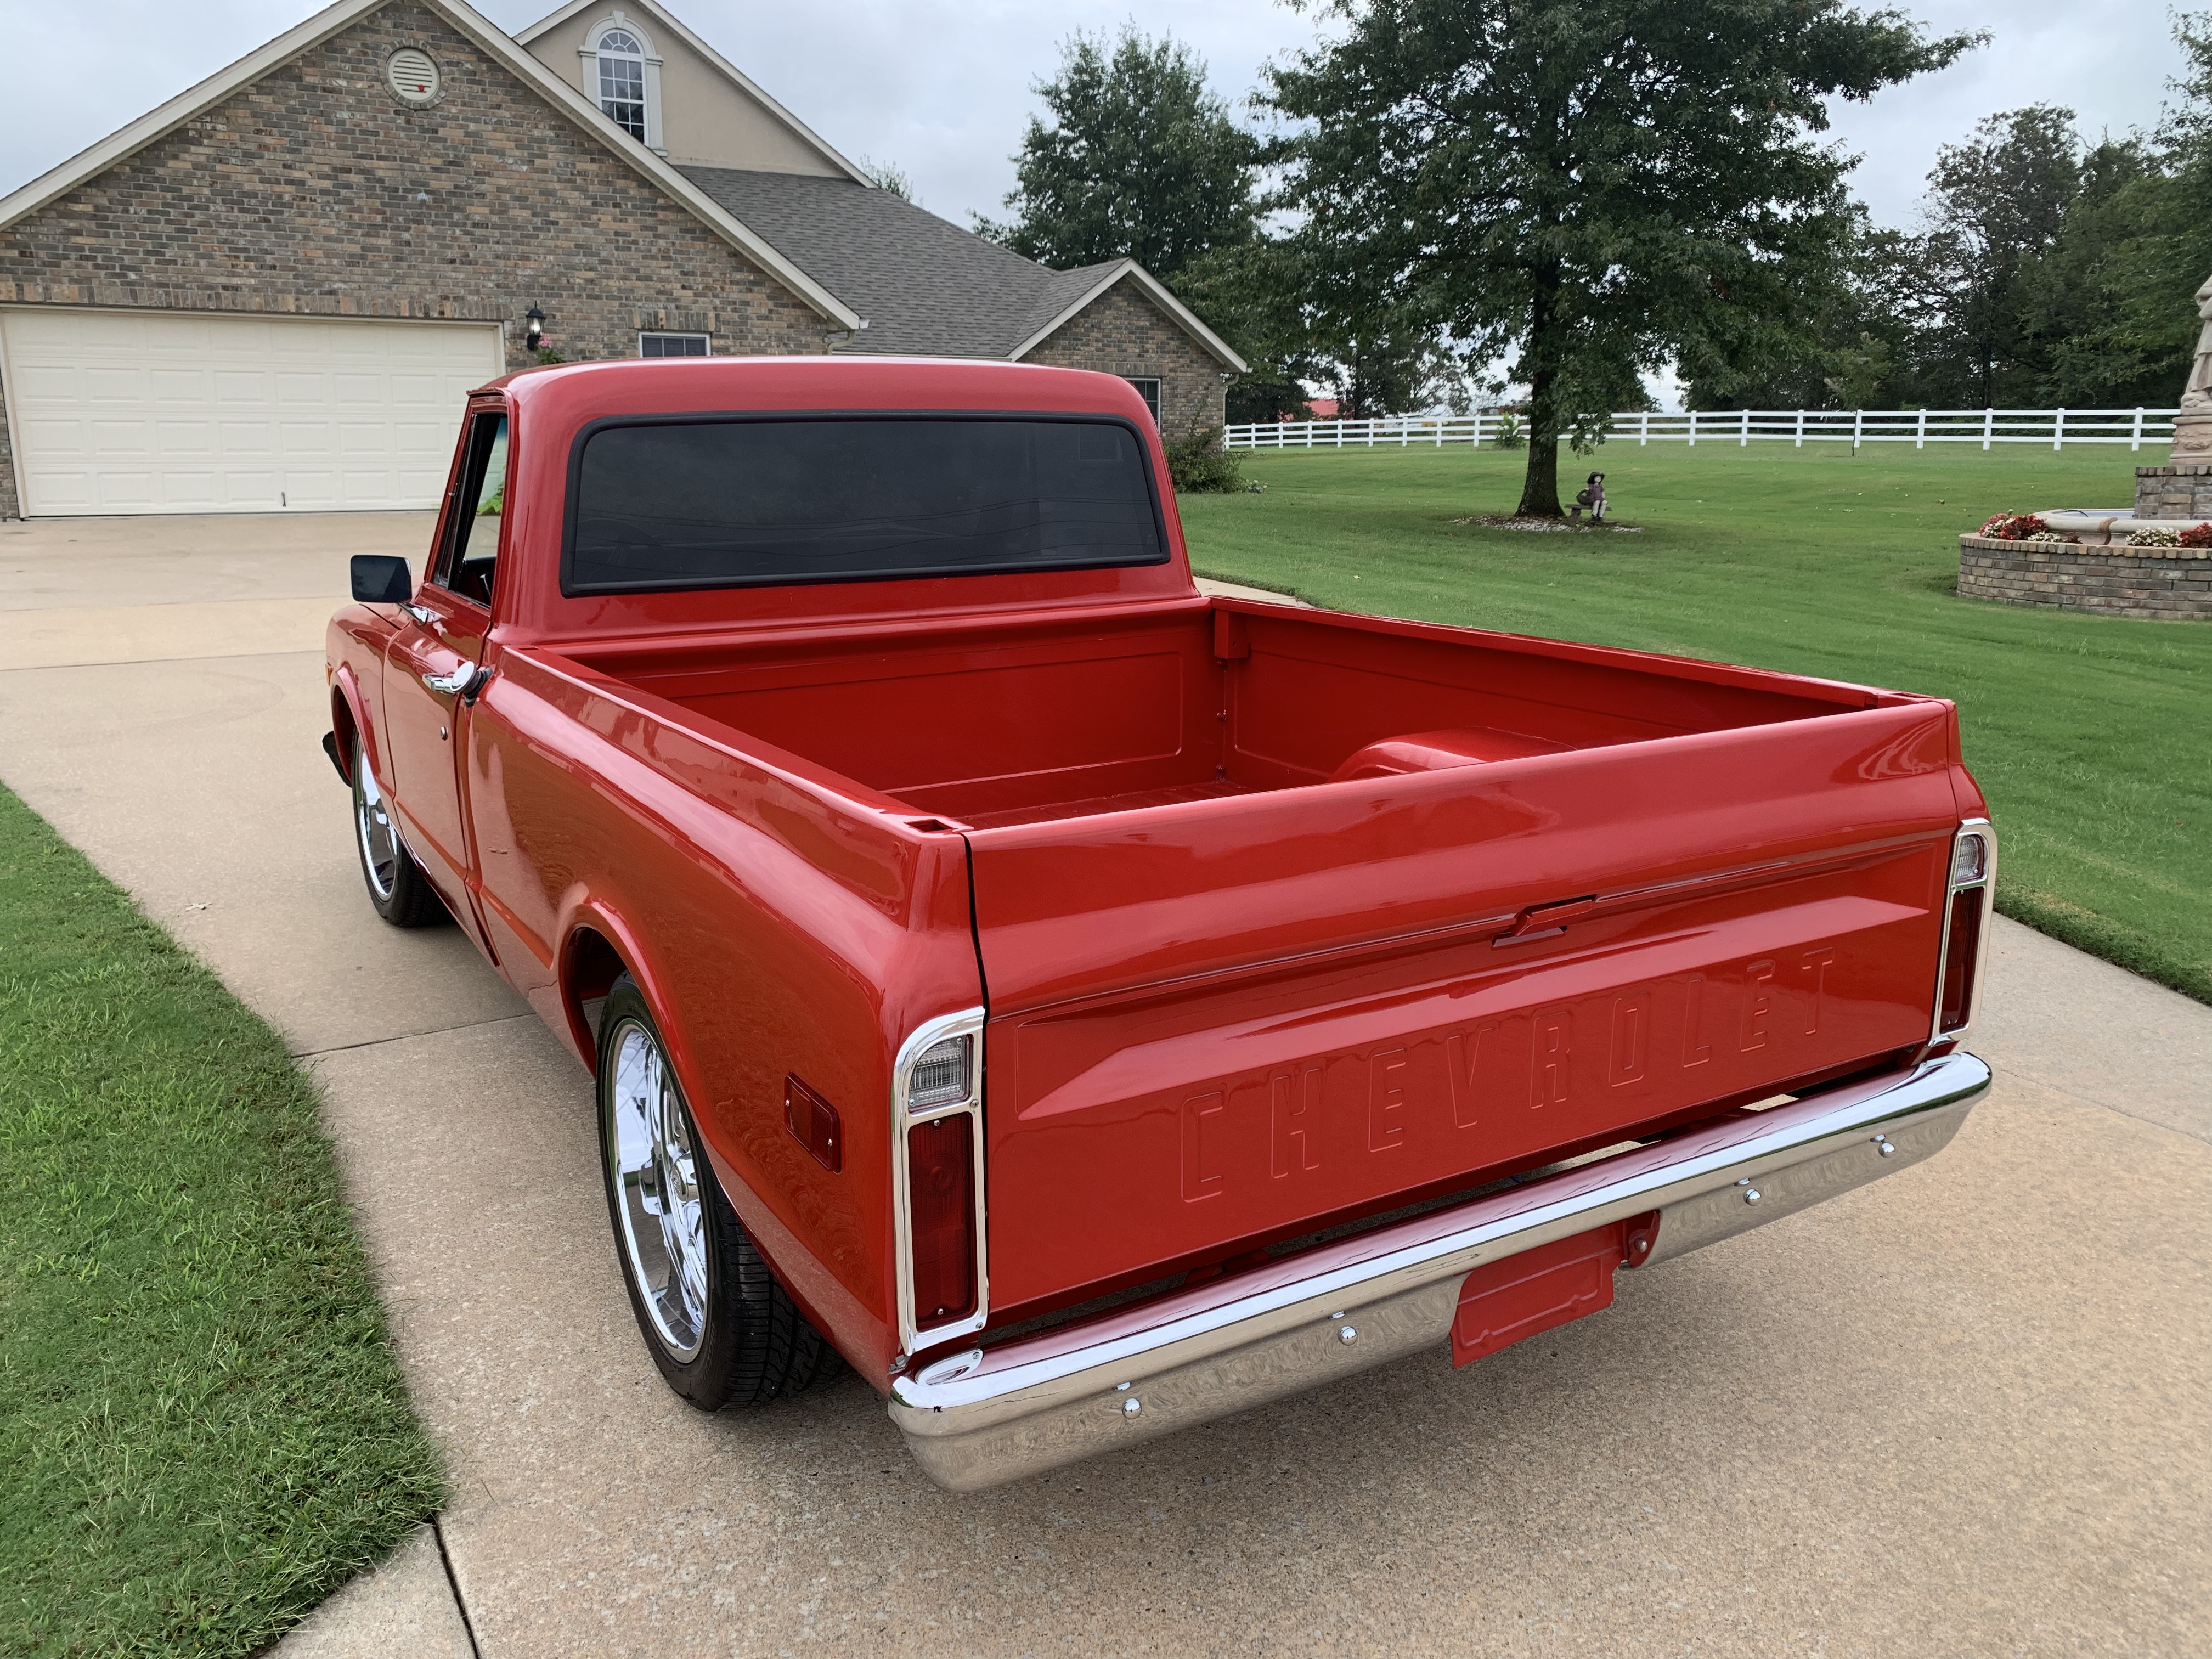 7th Image of a 1972 CHEVROLET C-10